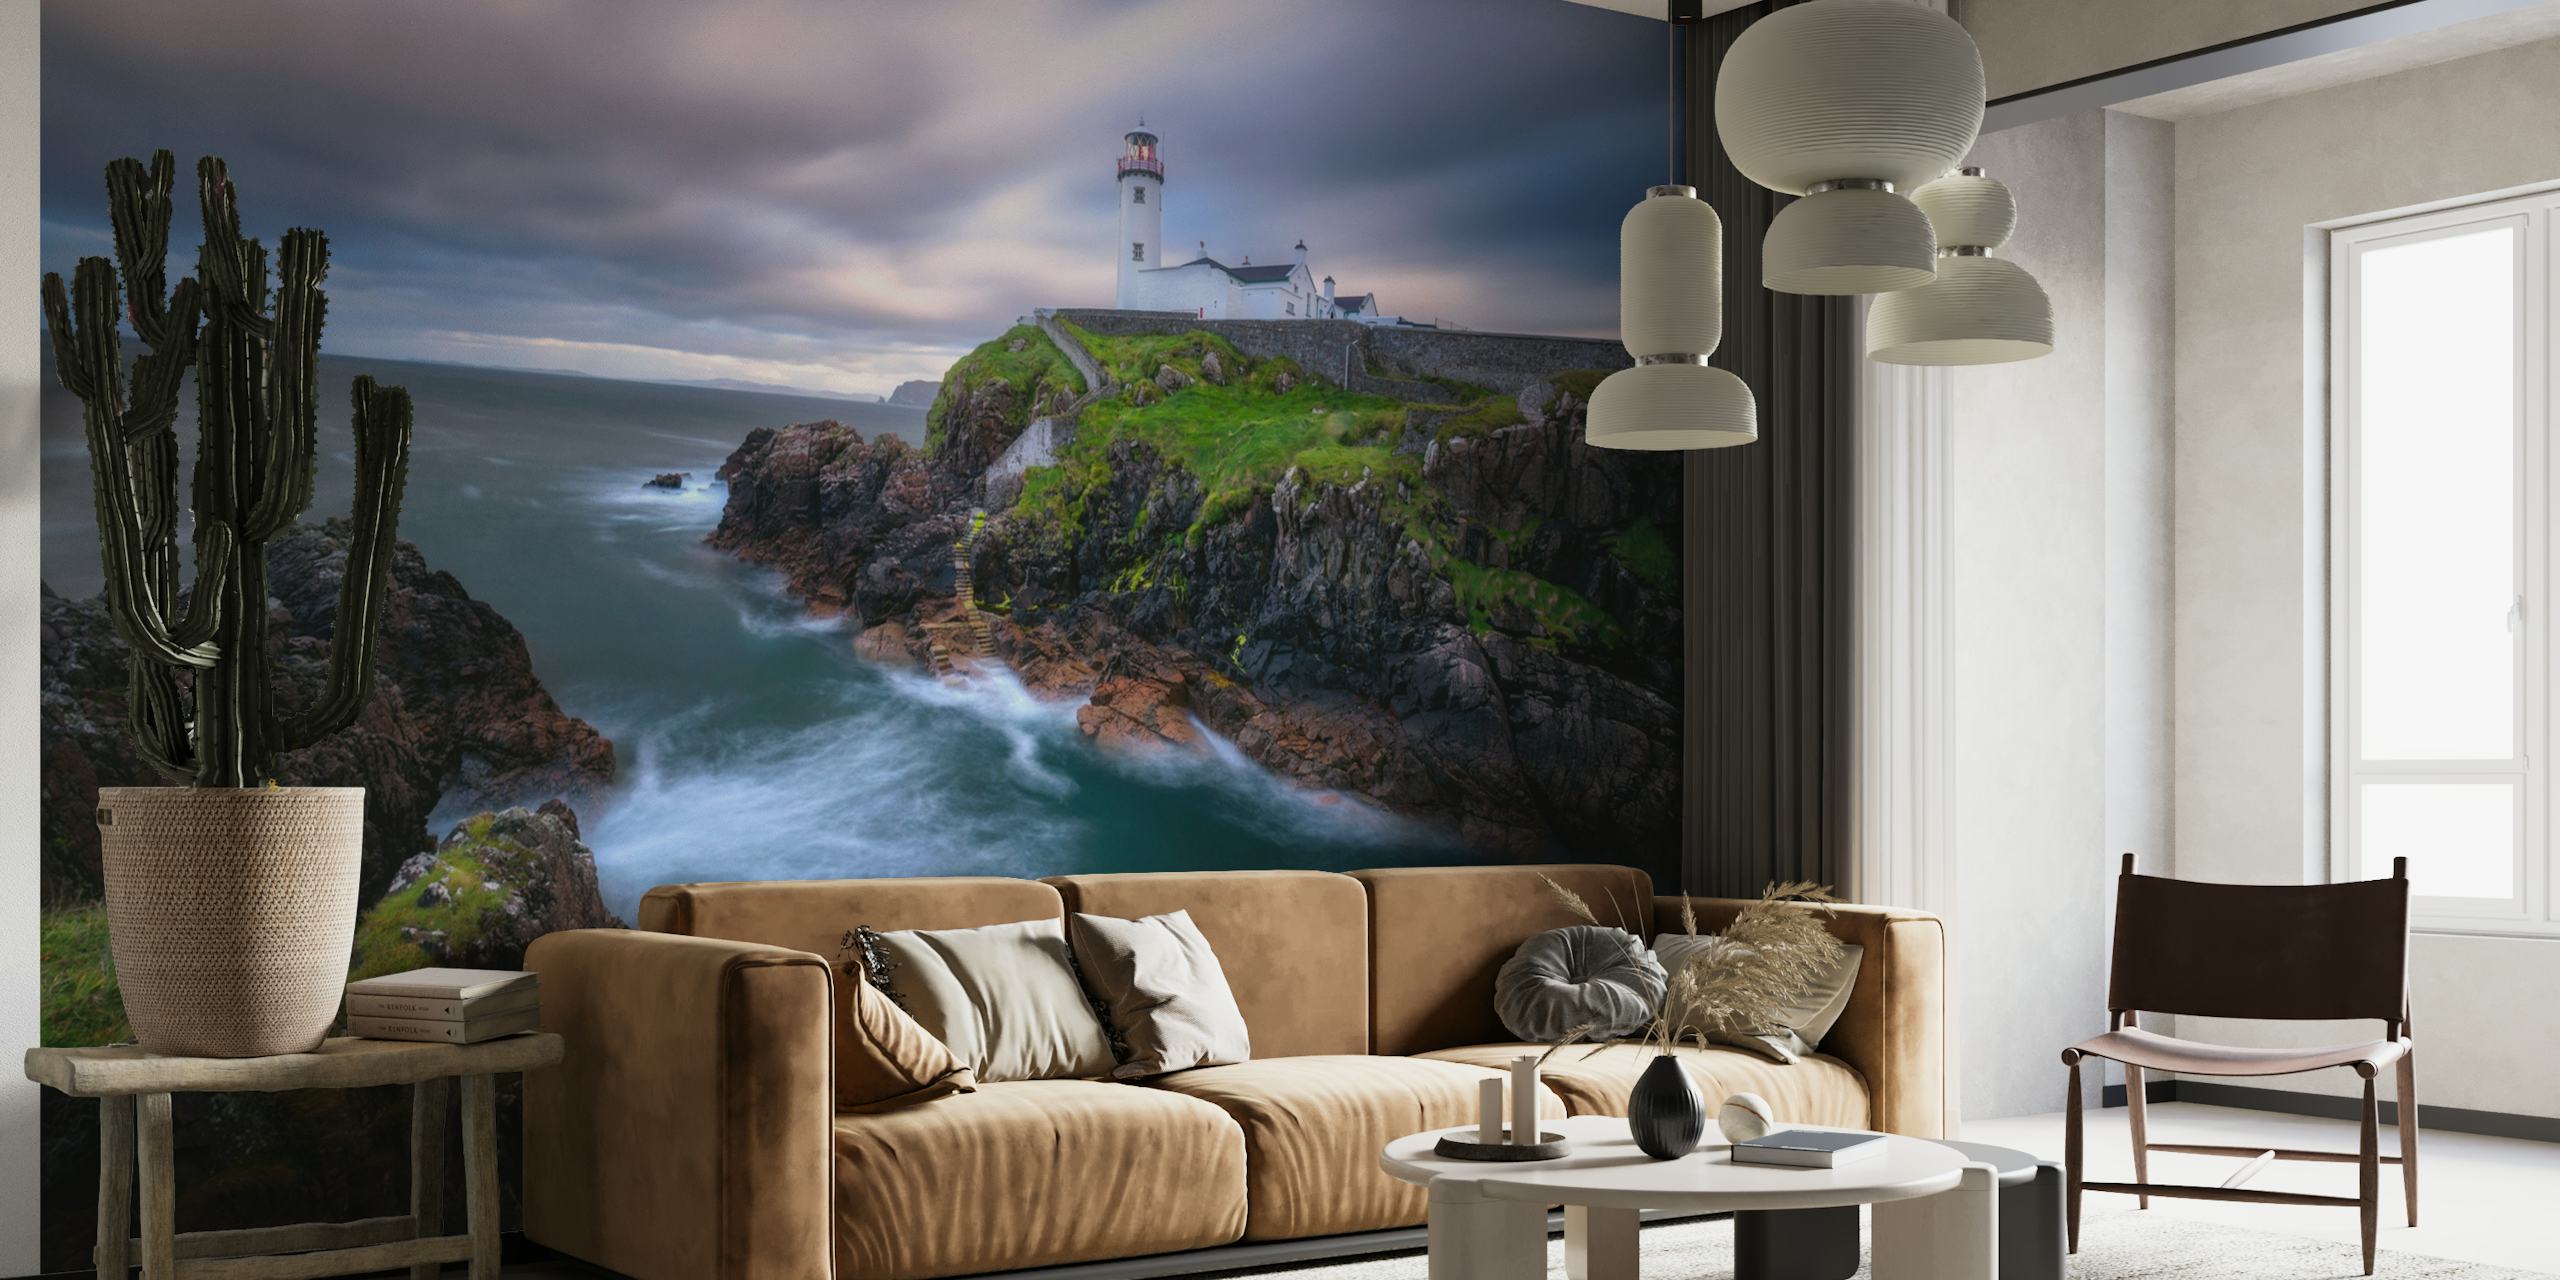 Fanad Head Lighthouse wall mural with dramatic sky and Atlantic Ocean view